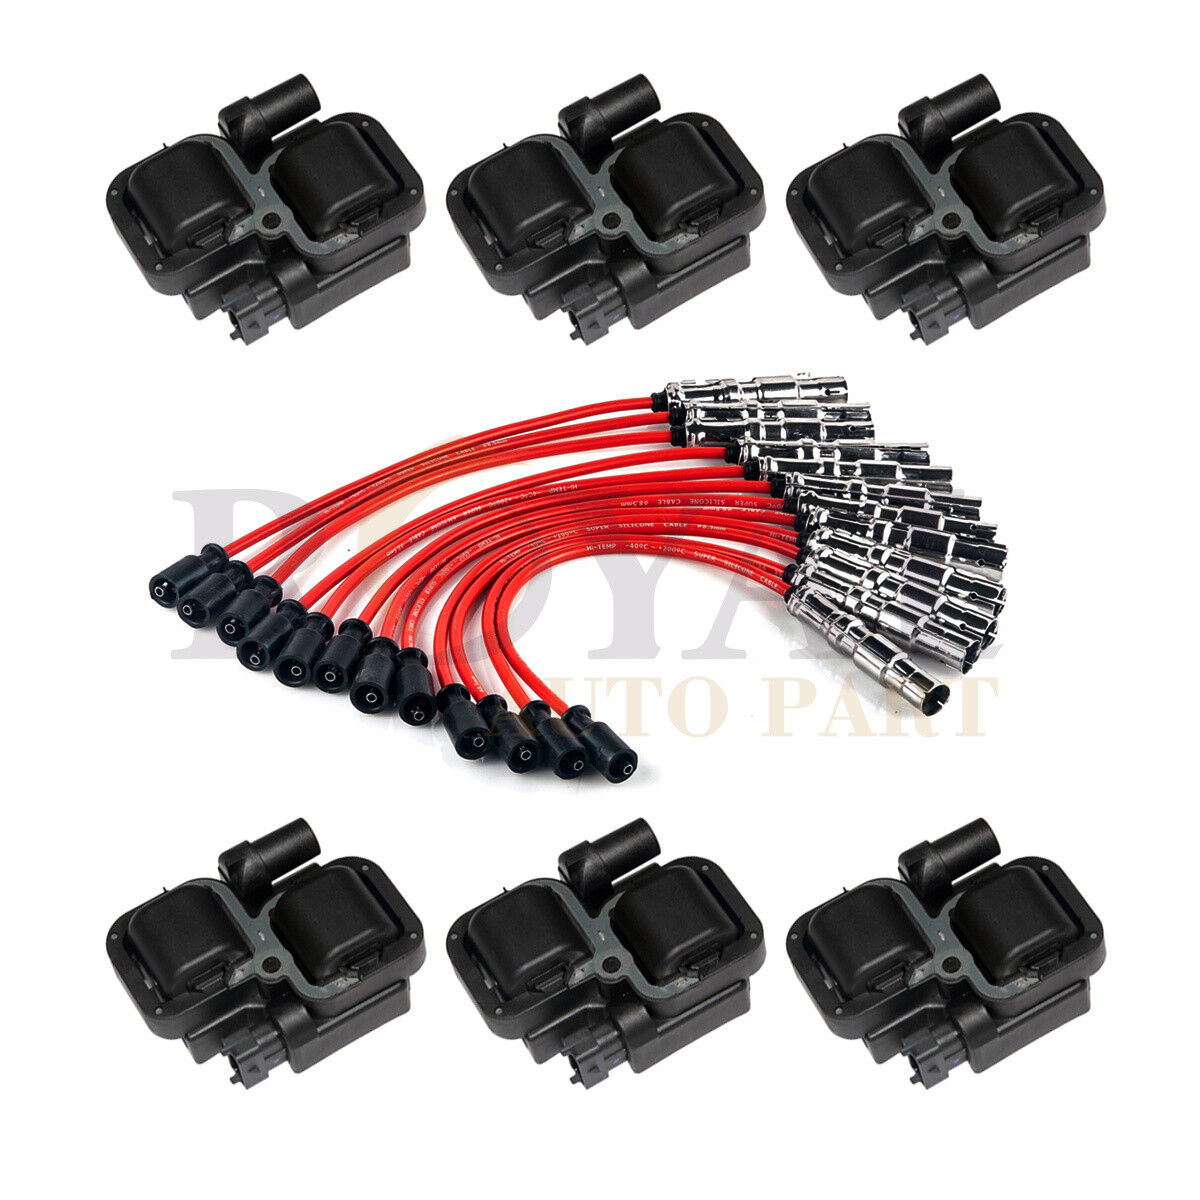 6 pack Ignition Spark Coils with Plug wire sets For Mercedes-Benz C CL CLK ML